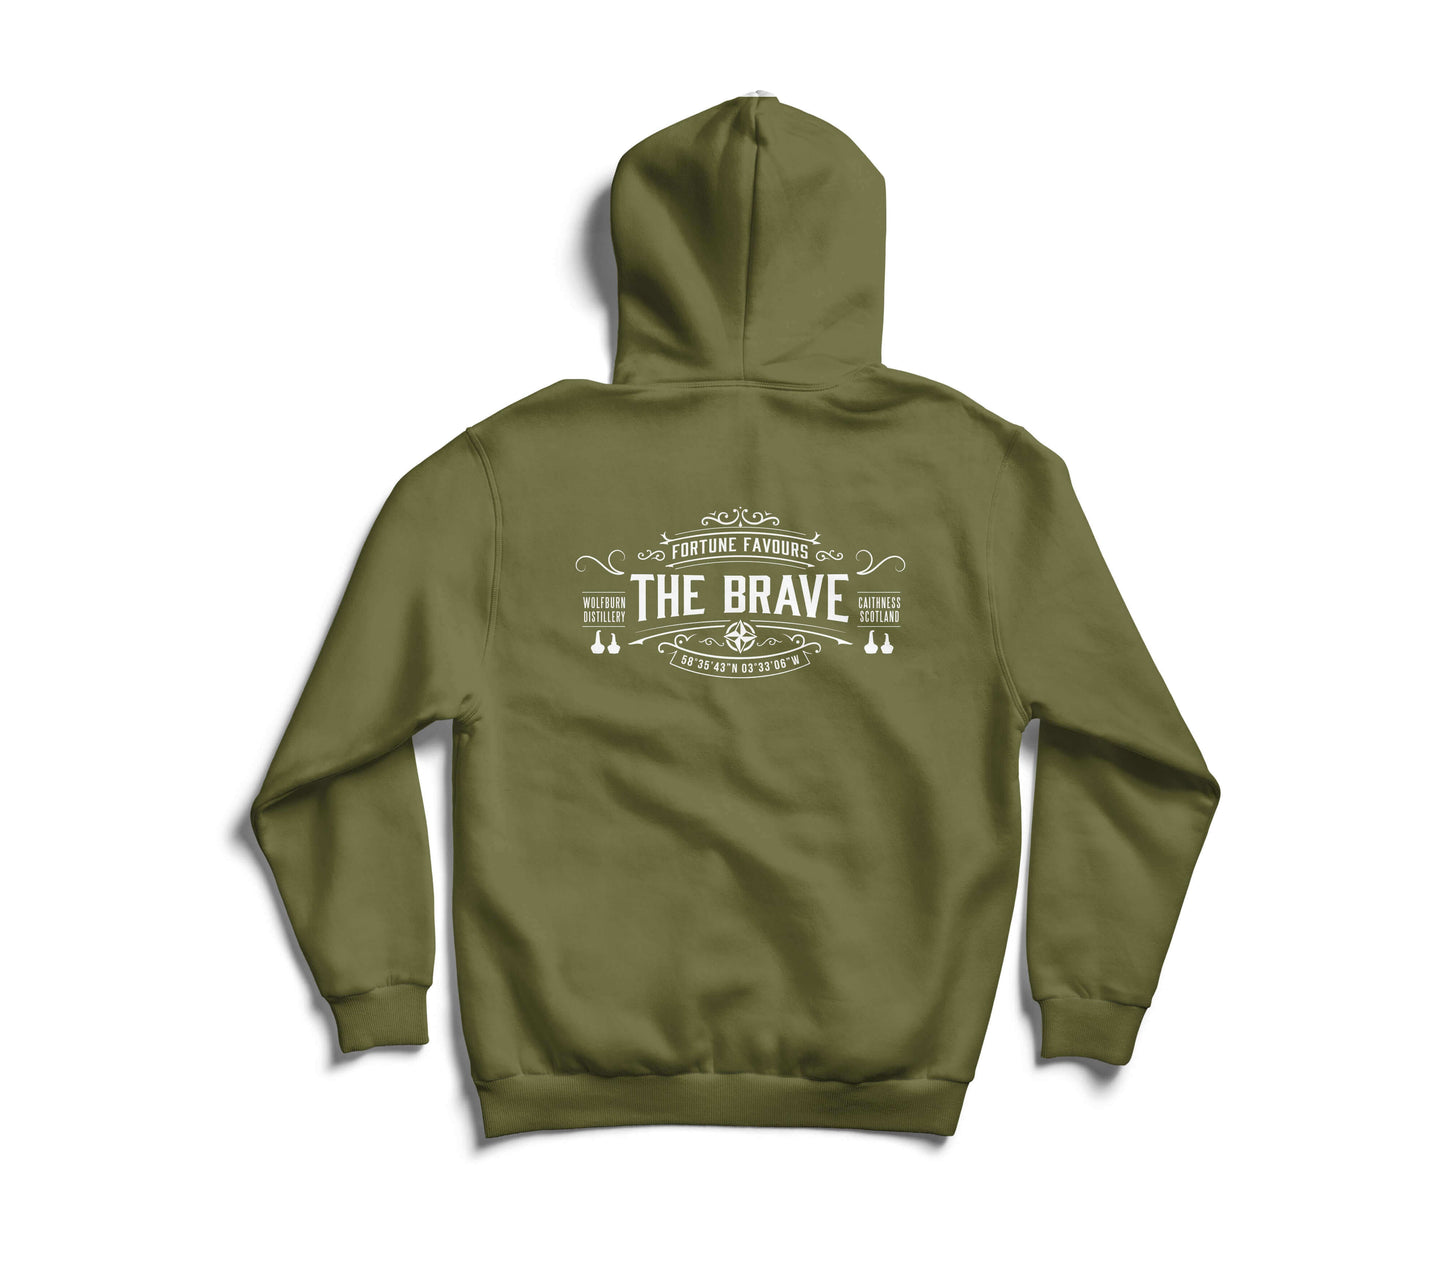 Wolfburn Distillery Wolfburn Hoodie ‘The Brave’ Hooded top. Screen printed 'Wolfburn' logo on the chest and large 'The Brave' on the back. £35.00